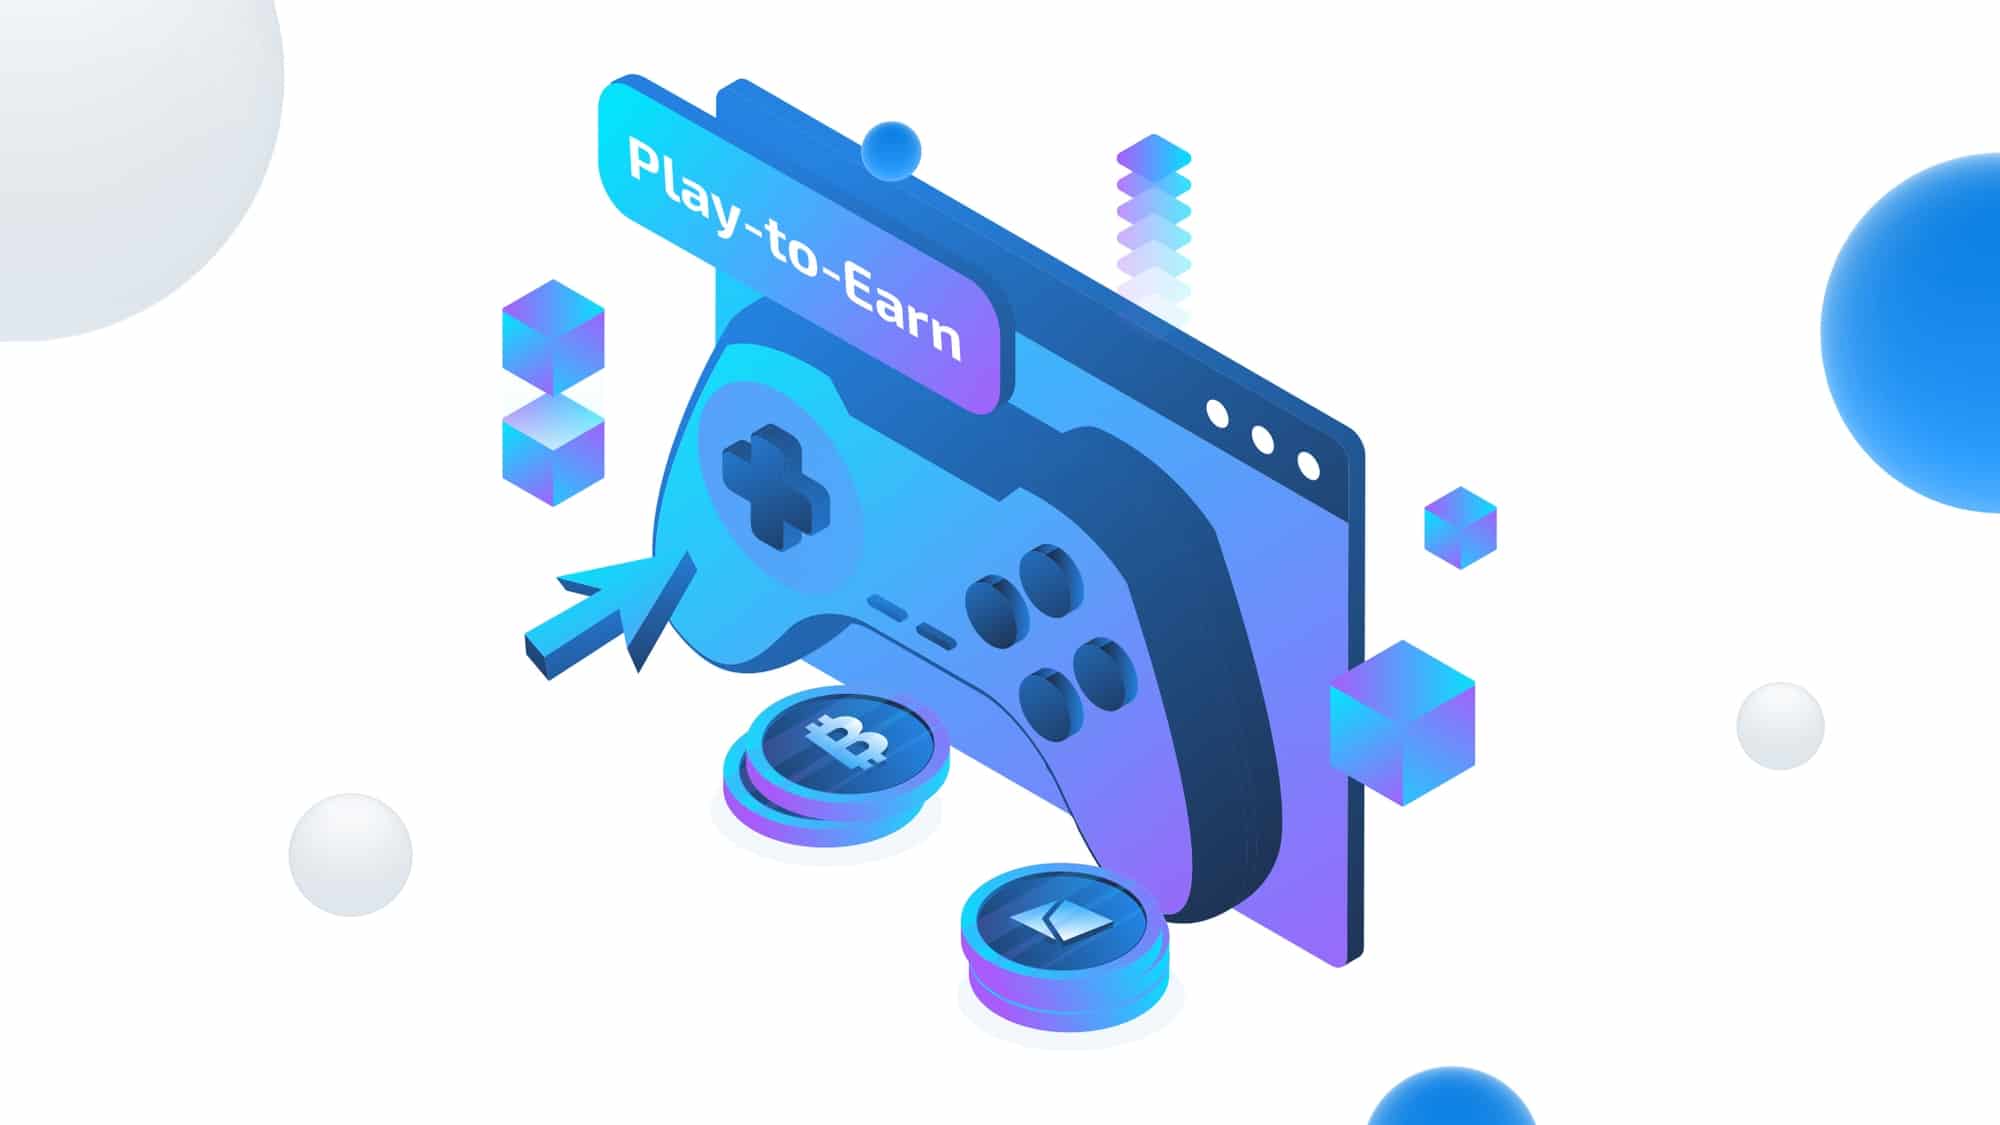 Chain Games | Web3 Gaming - Play to Earn